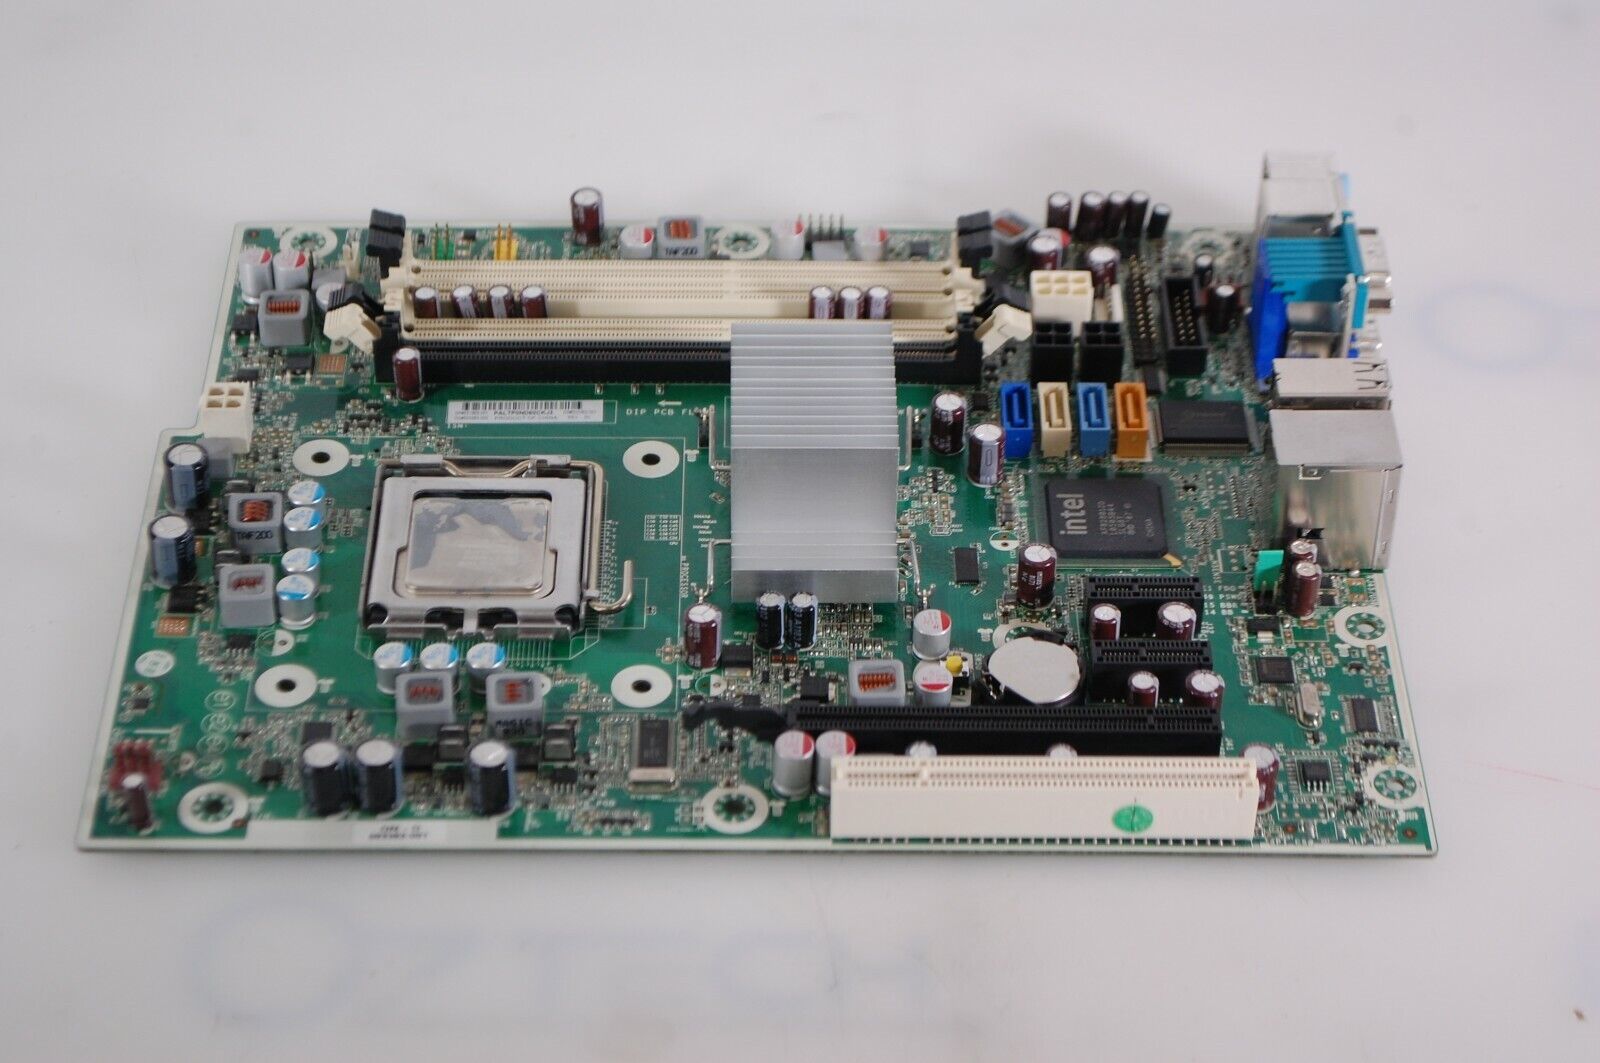 Primary image for HP PRO 6000 Series Motherboard 531965-001 w/ Intel Pentium 3.20GHz SLGUF